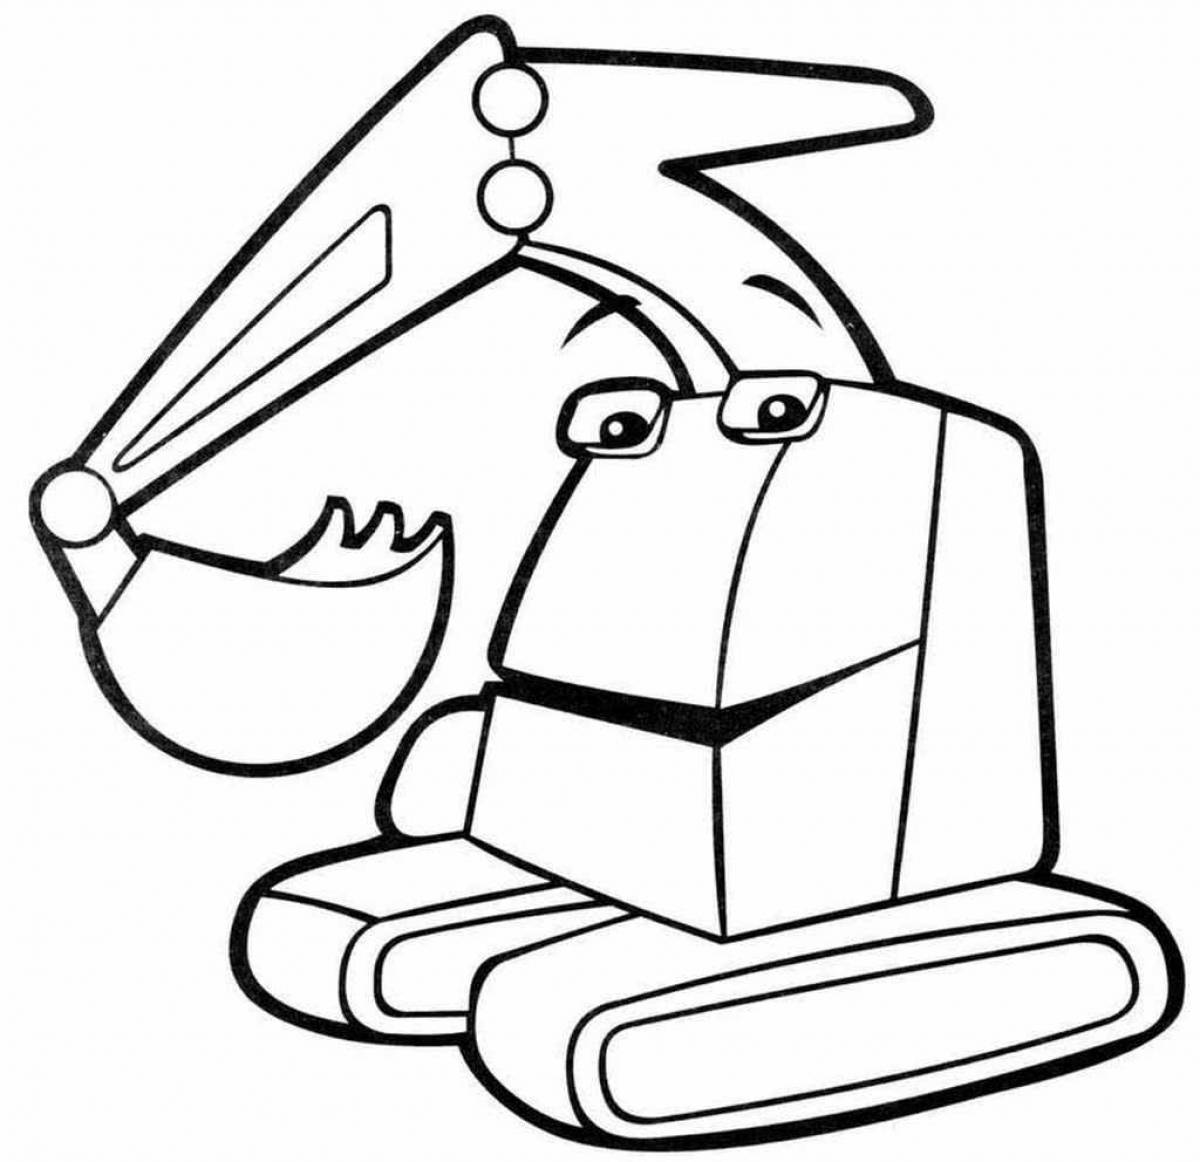 Great excavator coloring book for kids